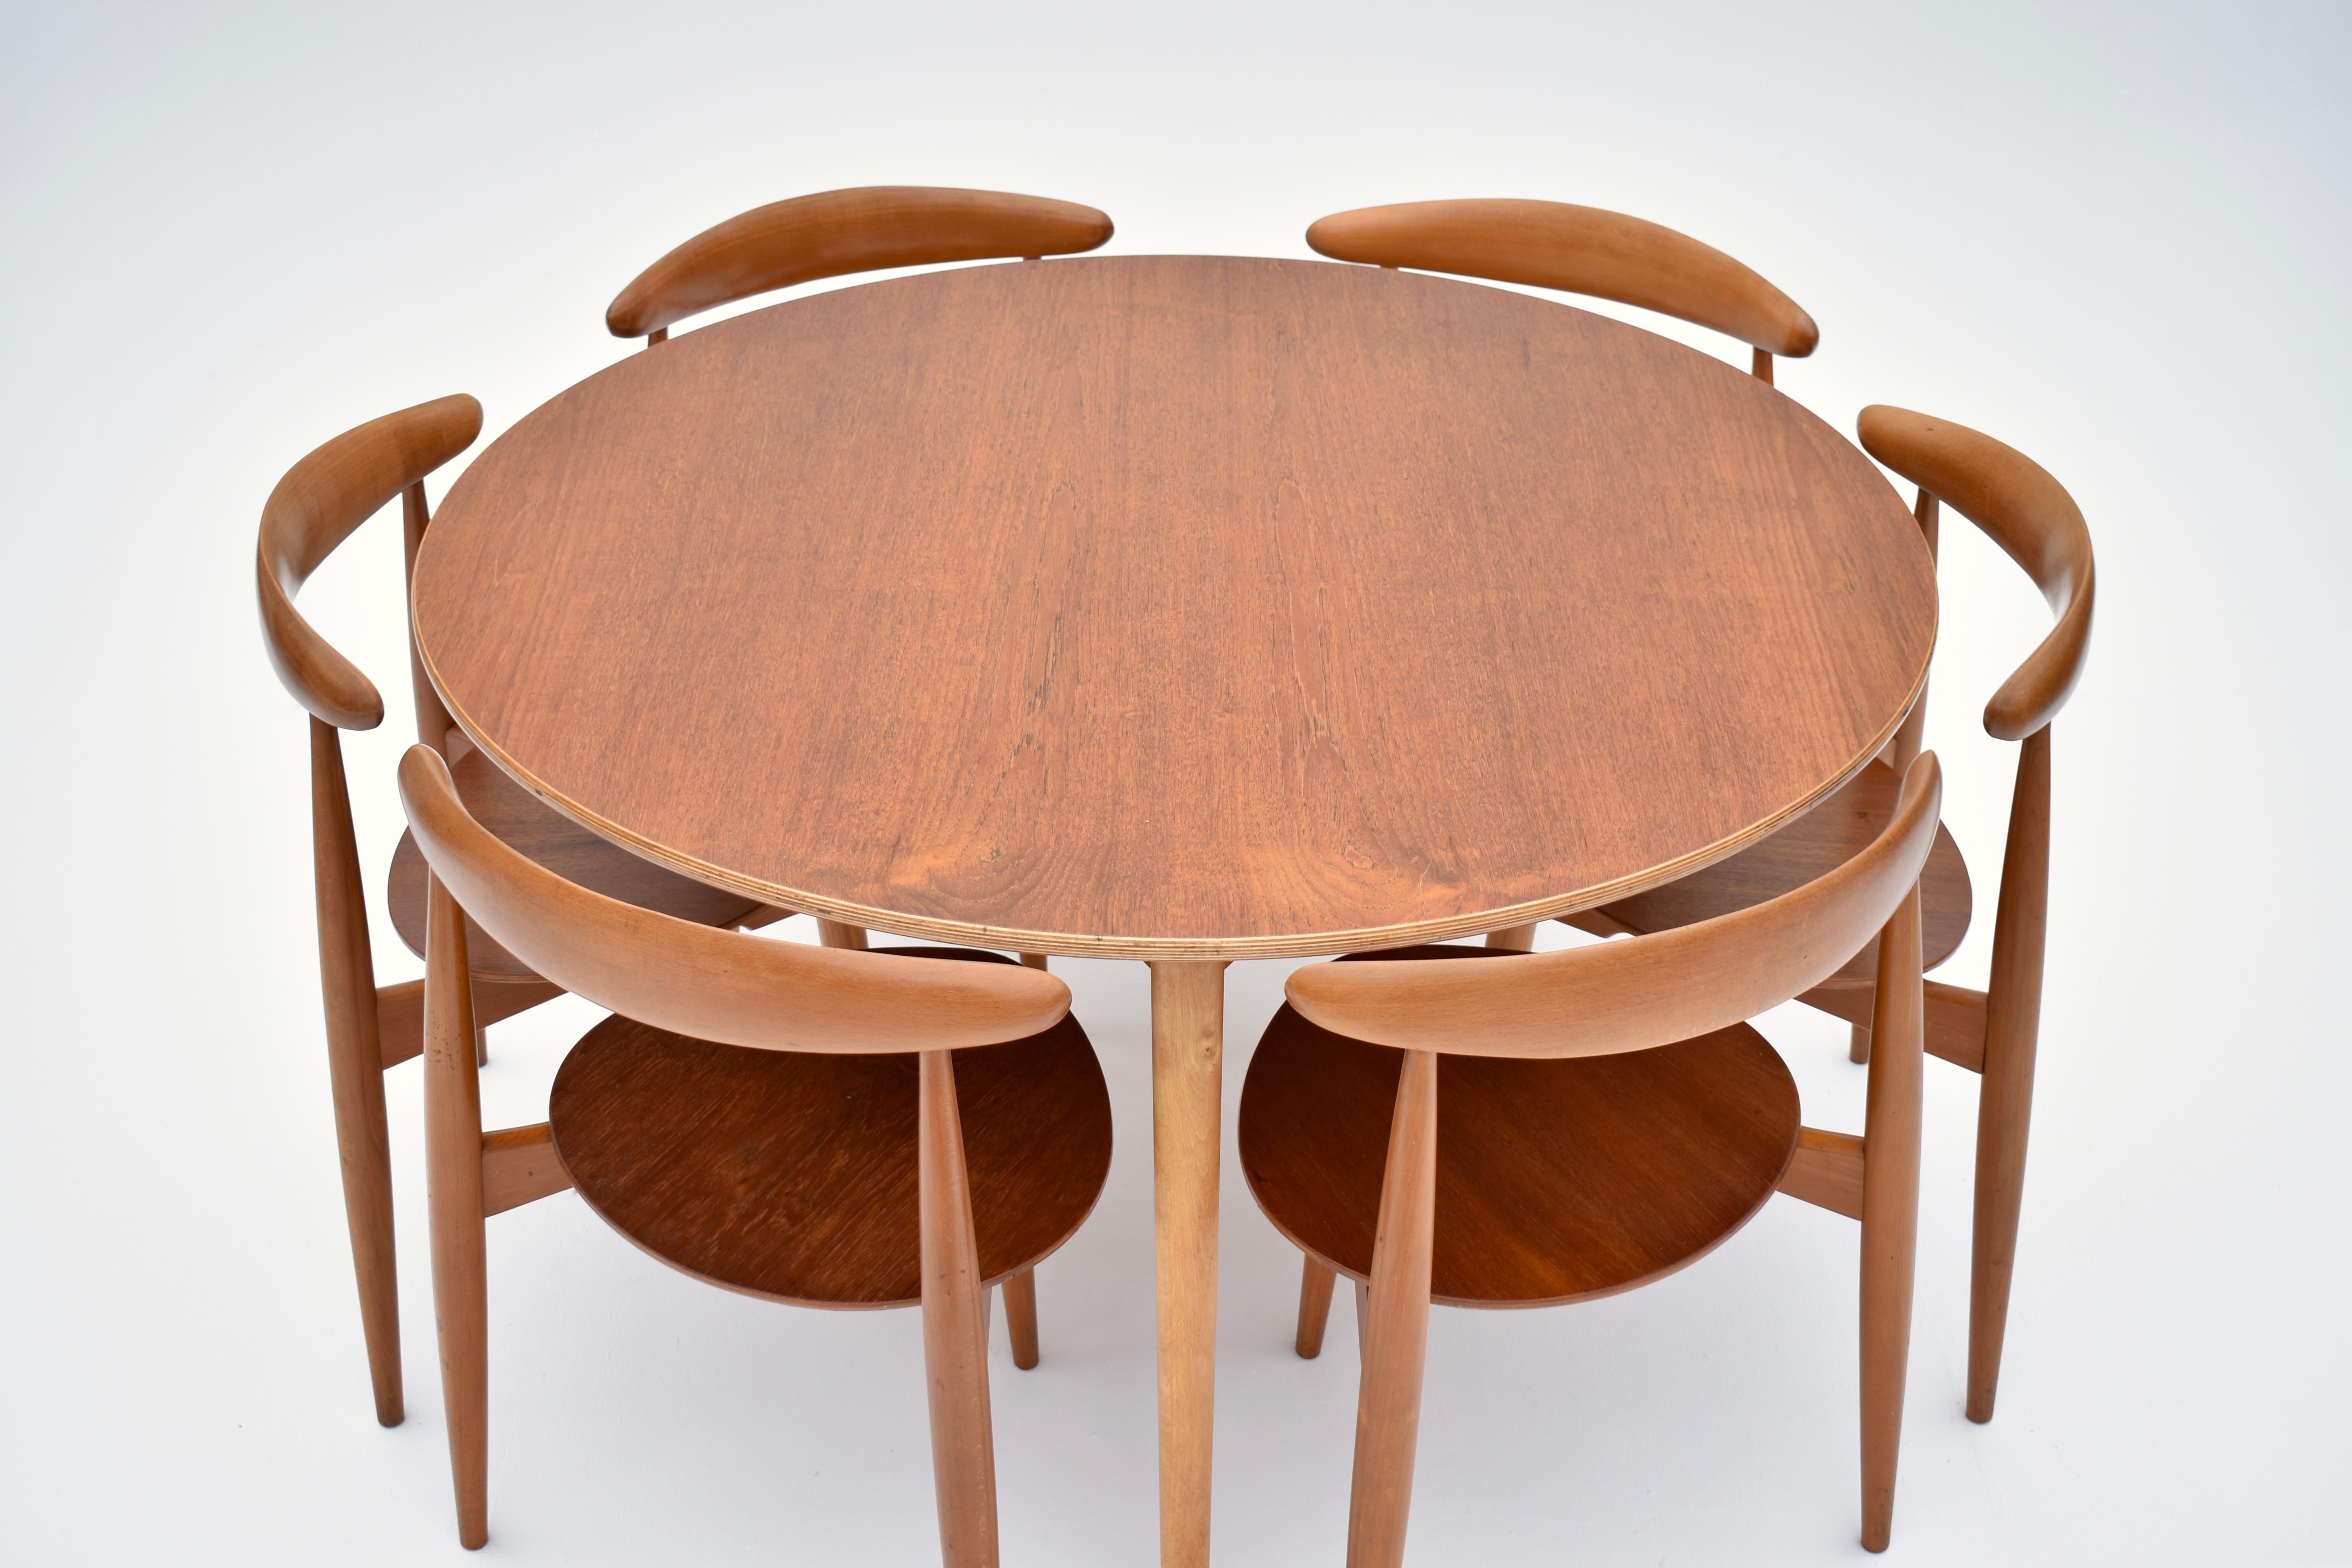 hans wegner table and chairs